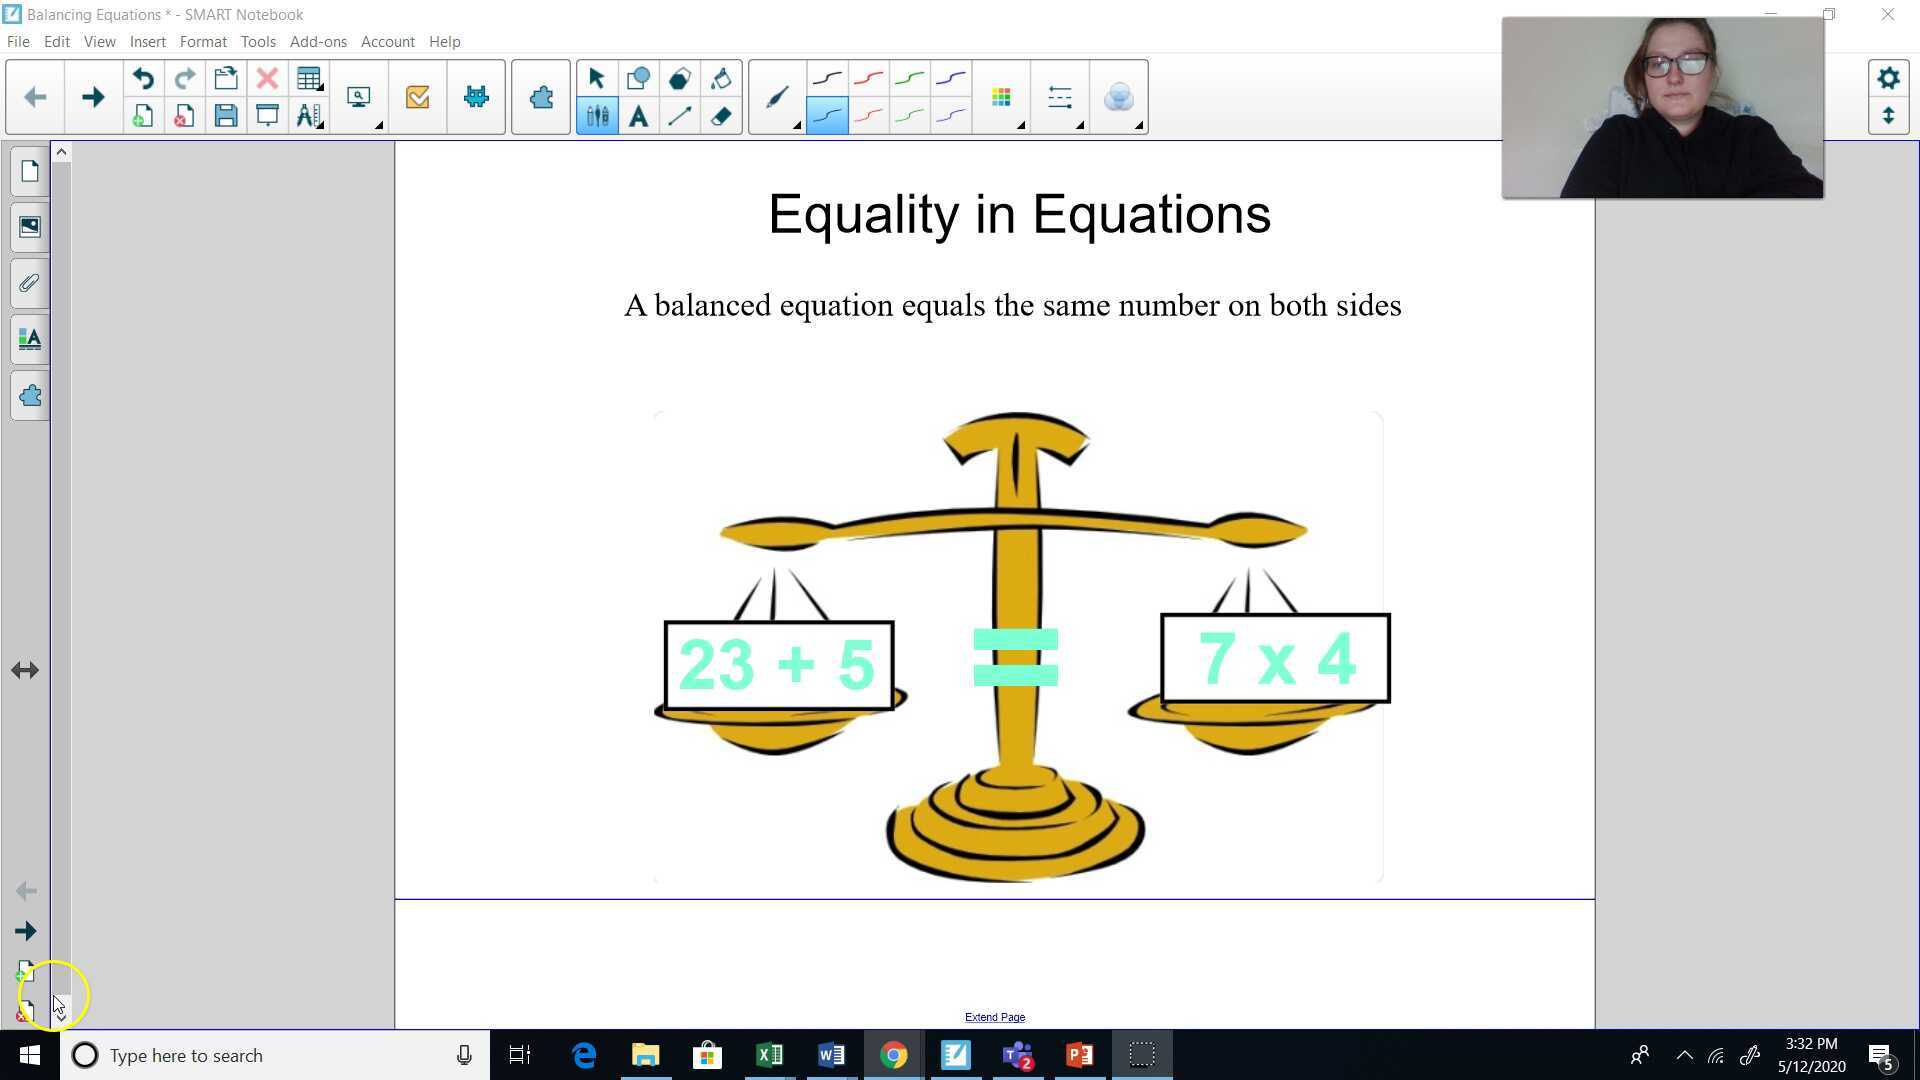 equality-in-equations-day-2-pt-1